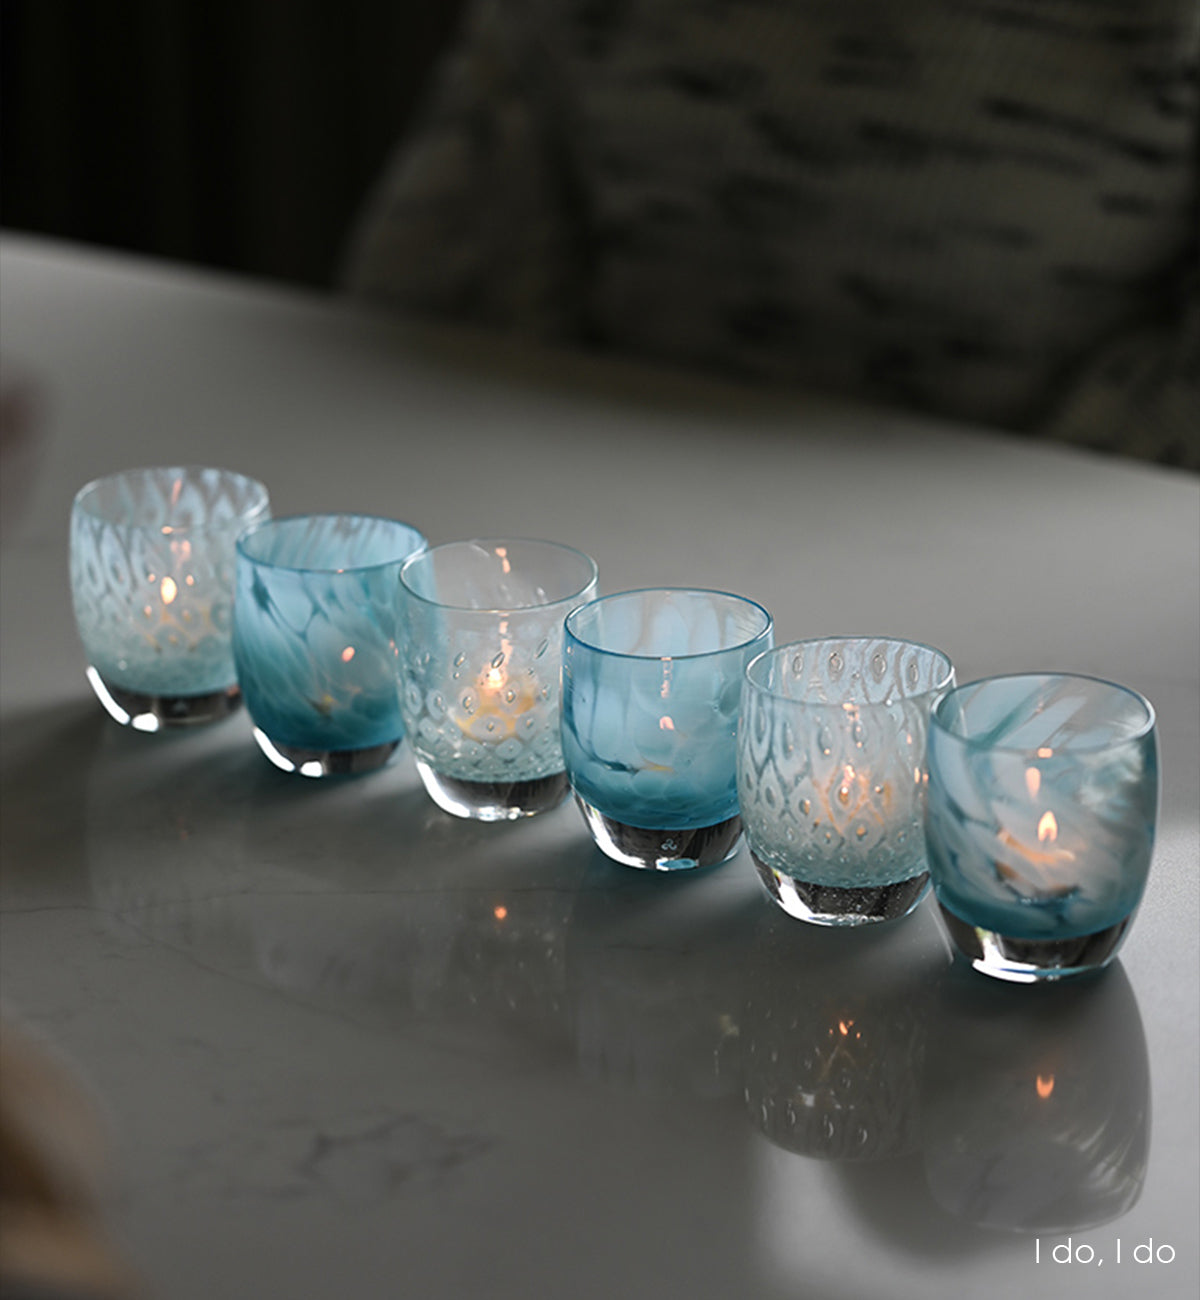 i do, i do is a set of two patterned light blue hand-blown glass votive candle holders. it includes good choice a light blue bubble pattern, and blessing a mottled blue pattern.